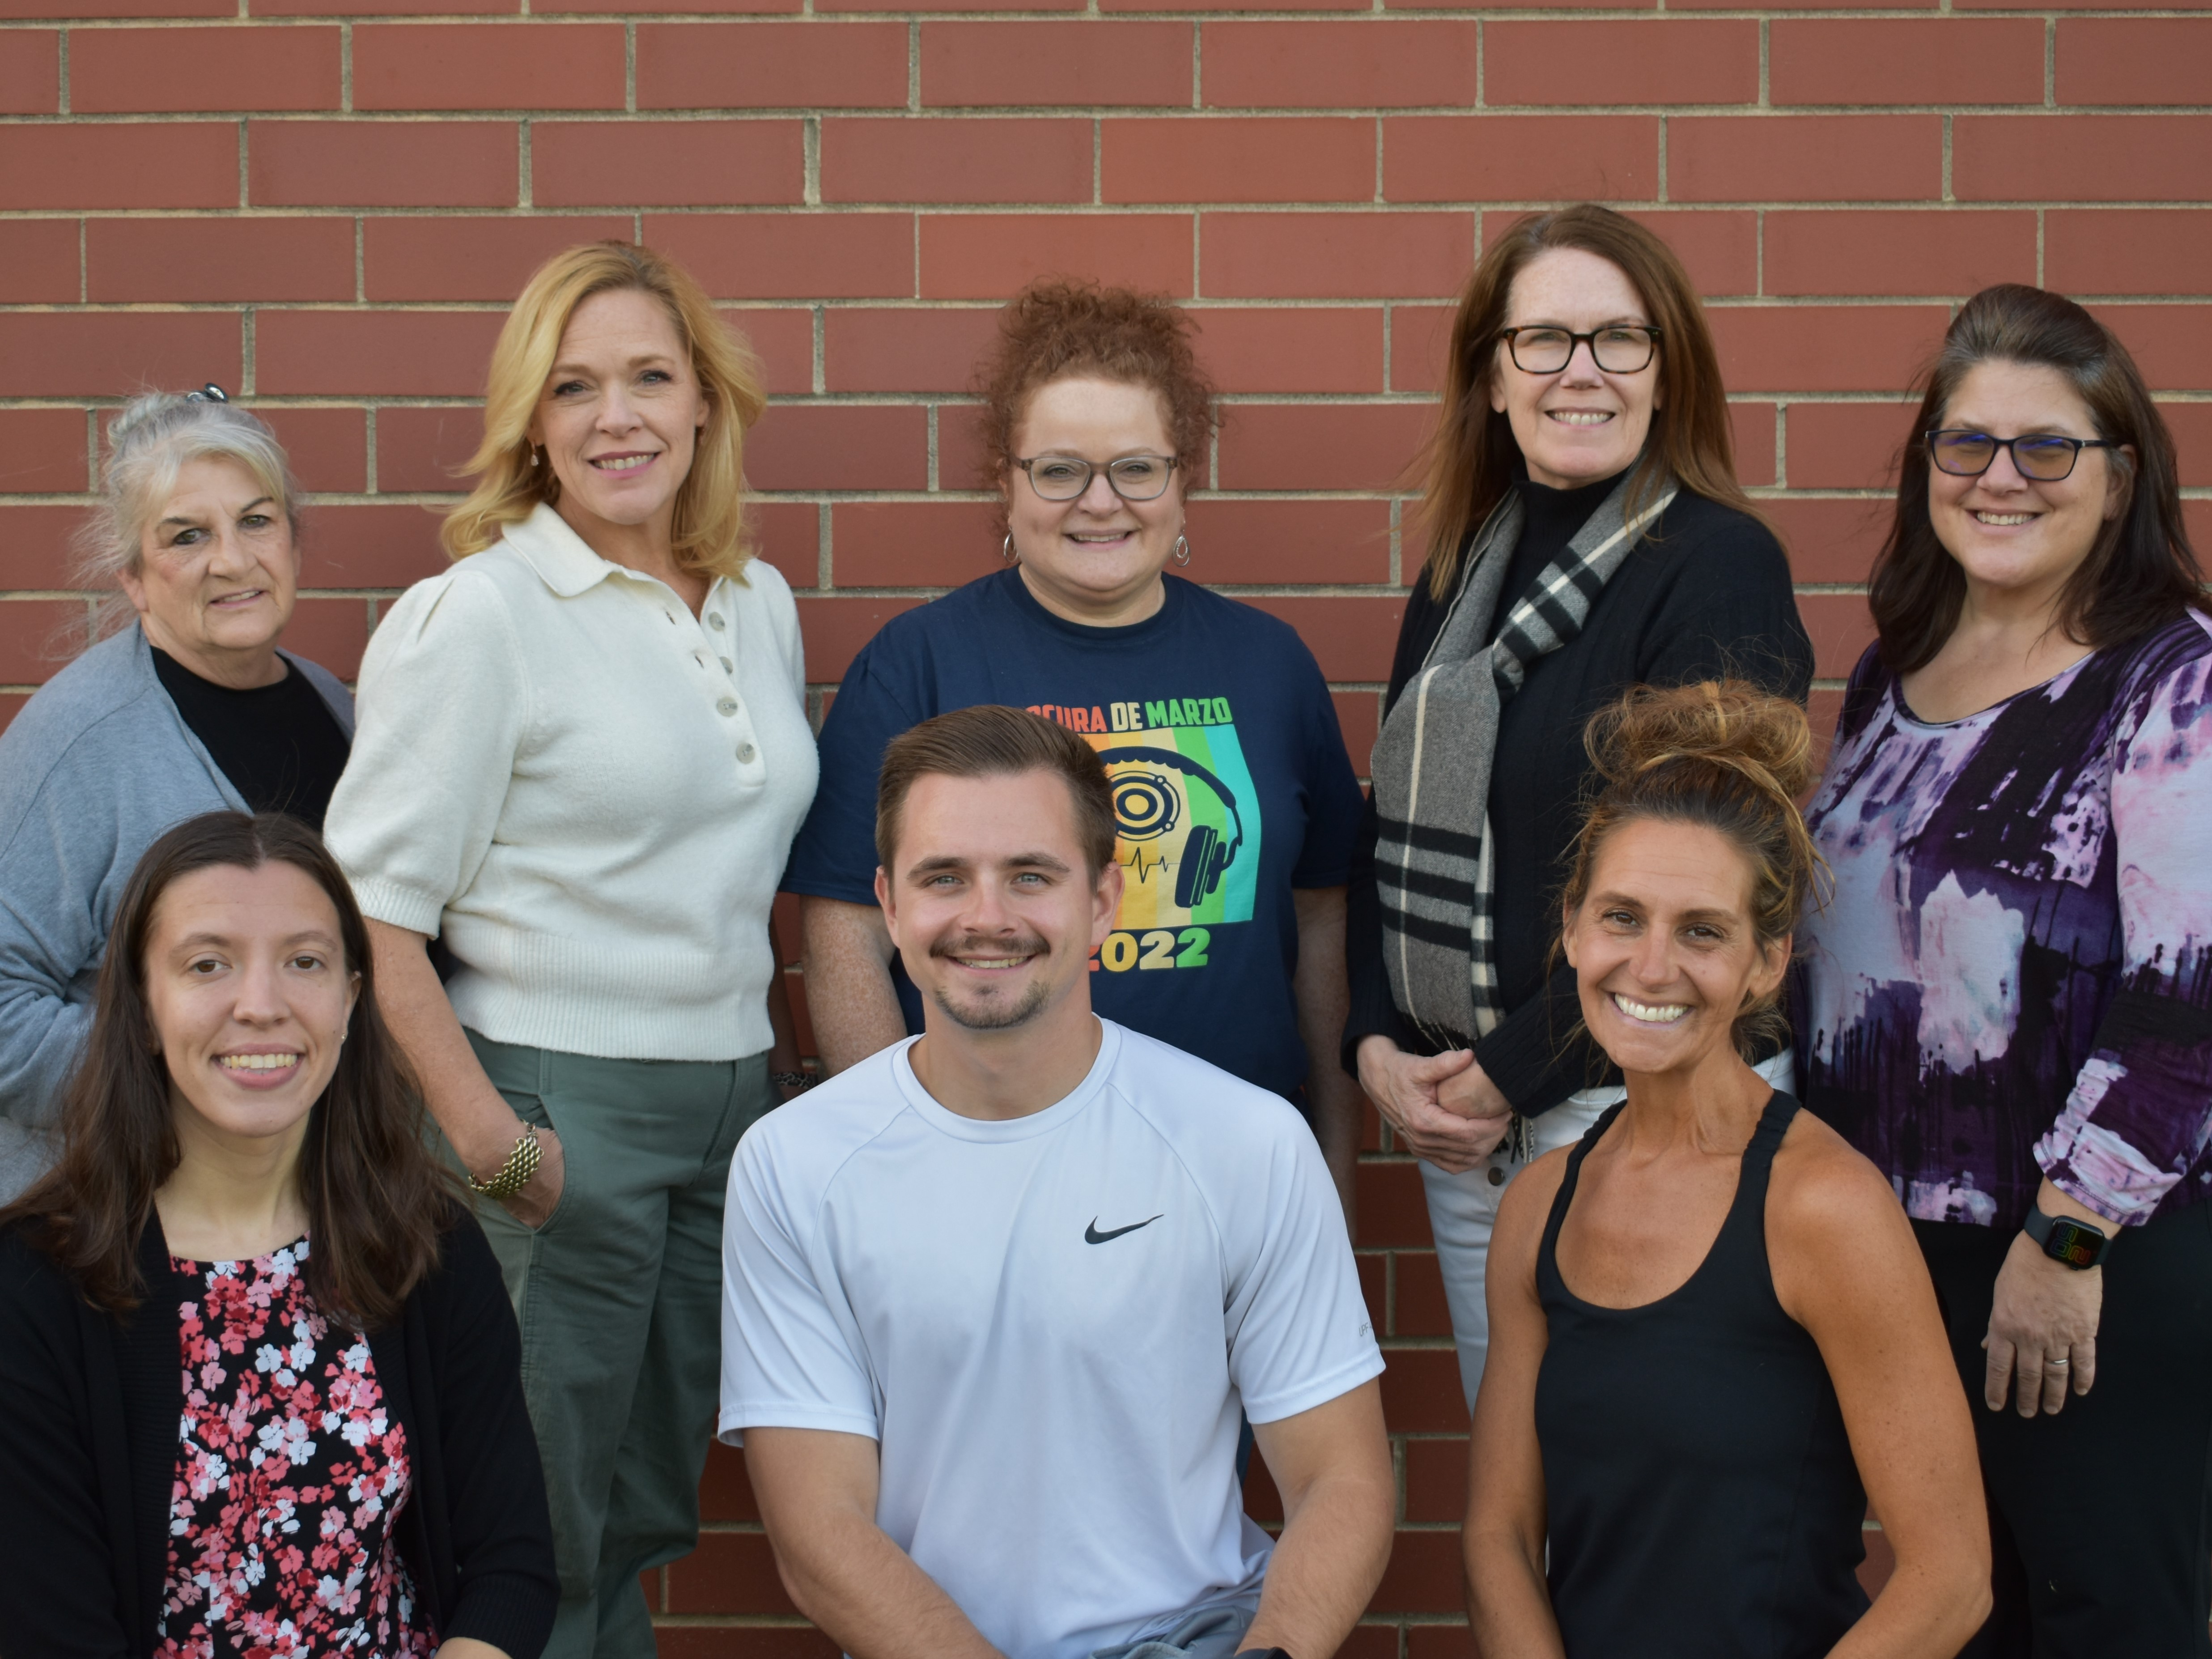 Benjamin Middle Schools specials teachers pictured from left to right: (back row)  Mrs. Hansen, Mrs. Tepe, Mrs. Anderson, Mrs. LaMantia,  Mrs. Wright, (front row) Ms. Martin, Mr. Hauser, and Mrs. Vidic